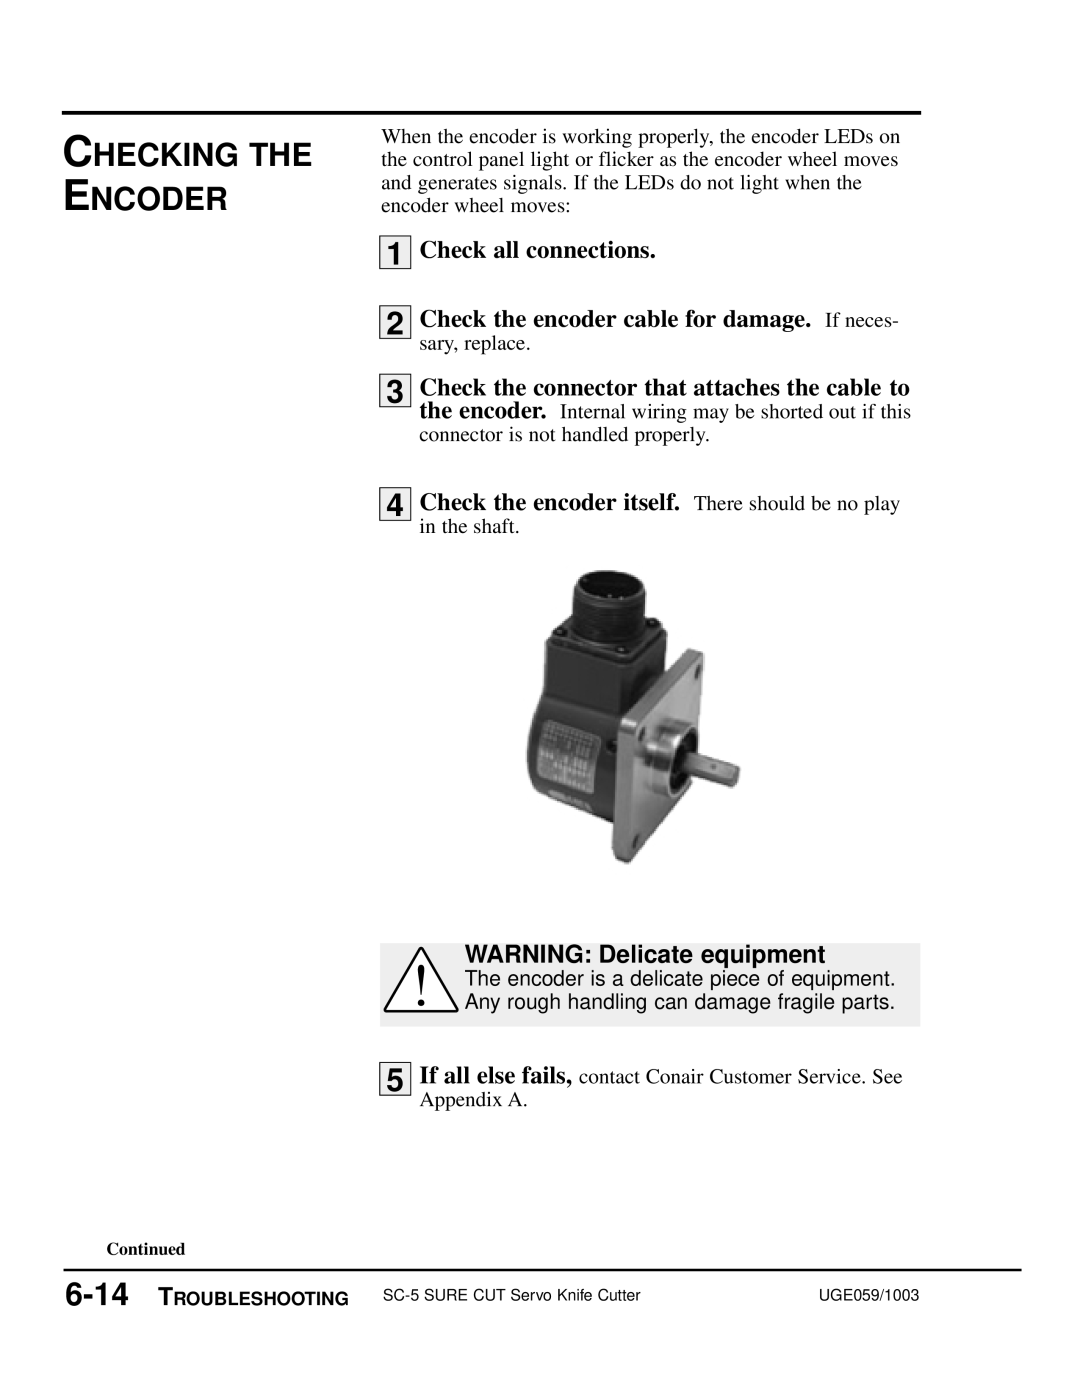 Conair SC-5 manual Checking The Encoder, Check all connections, Check the encoder cable for damage. If neces 